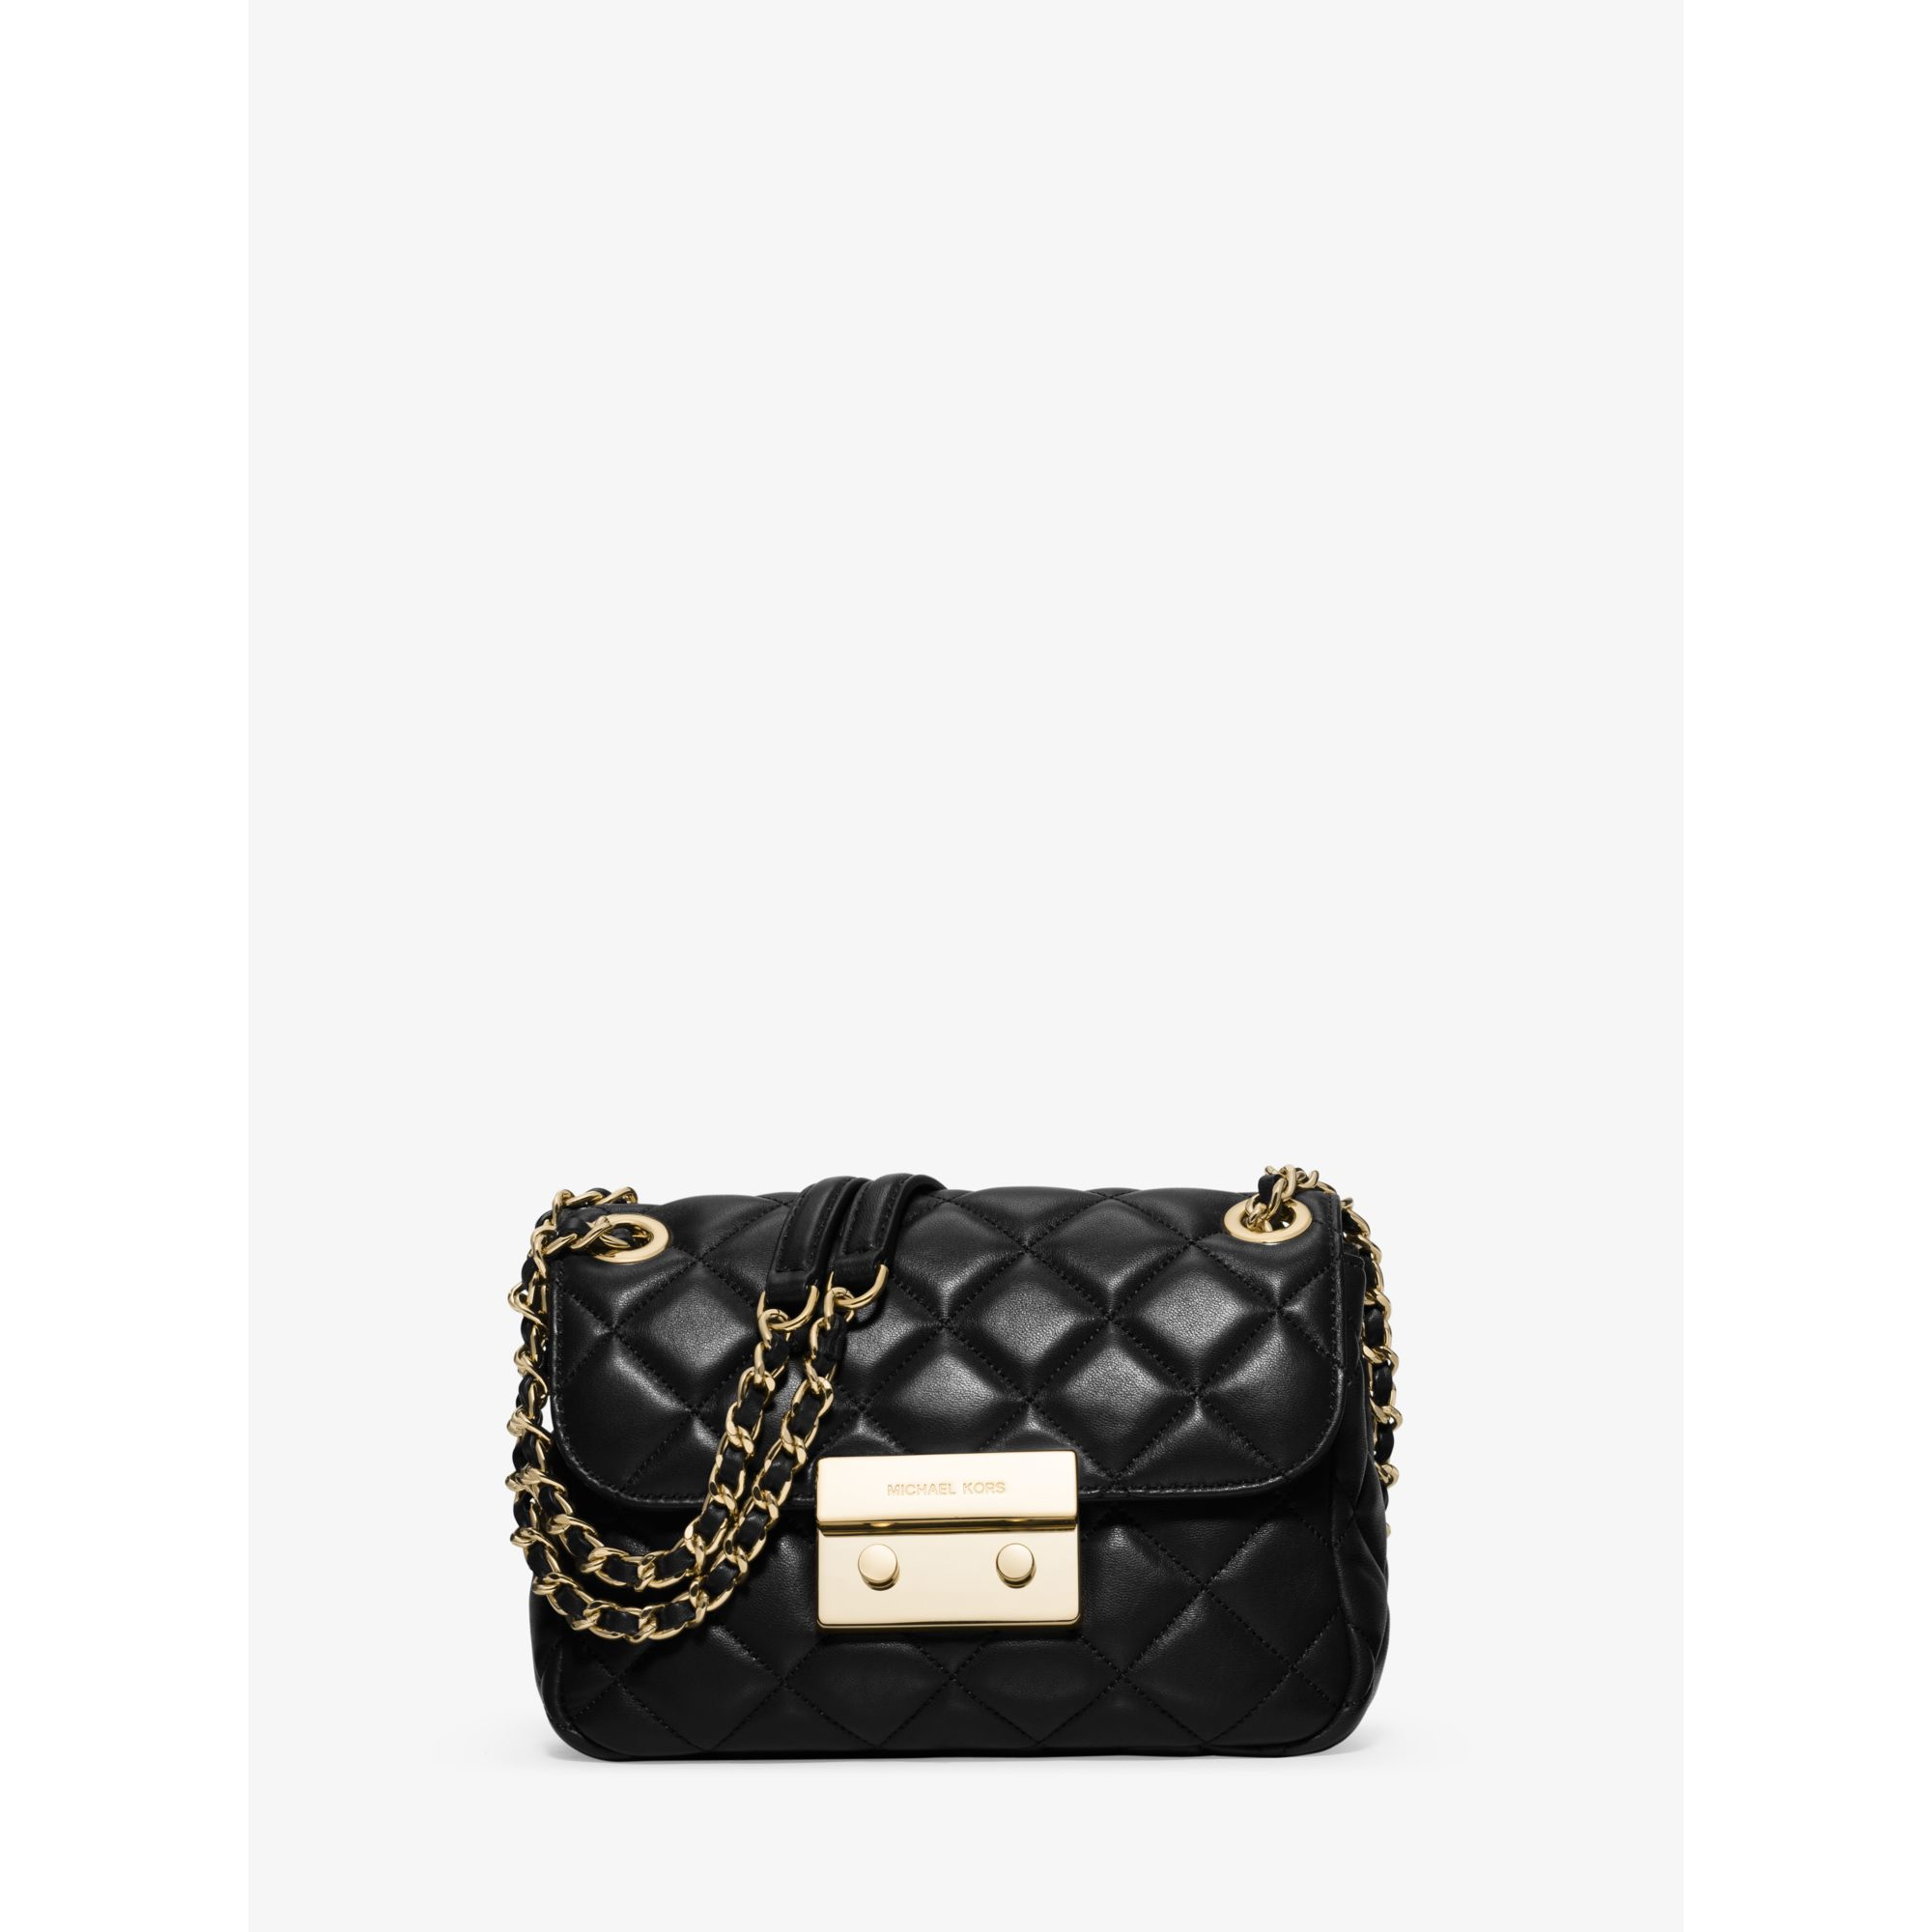 Michael Kors Sloan Small Quilted-leather Shoulder Bag in Black - Lyst